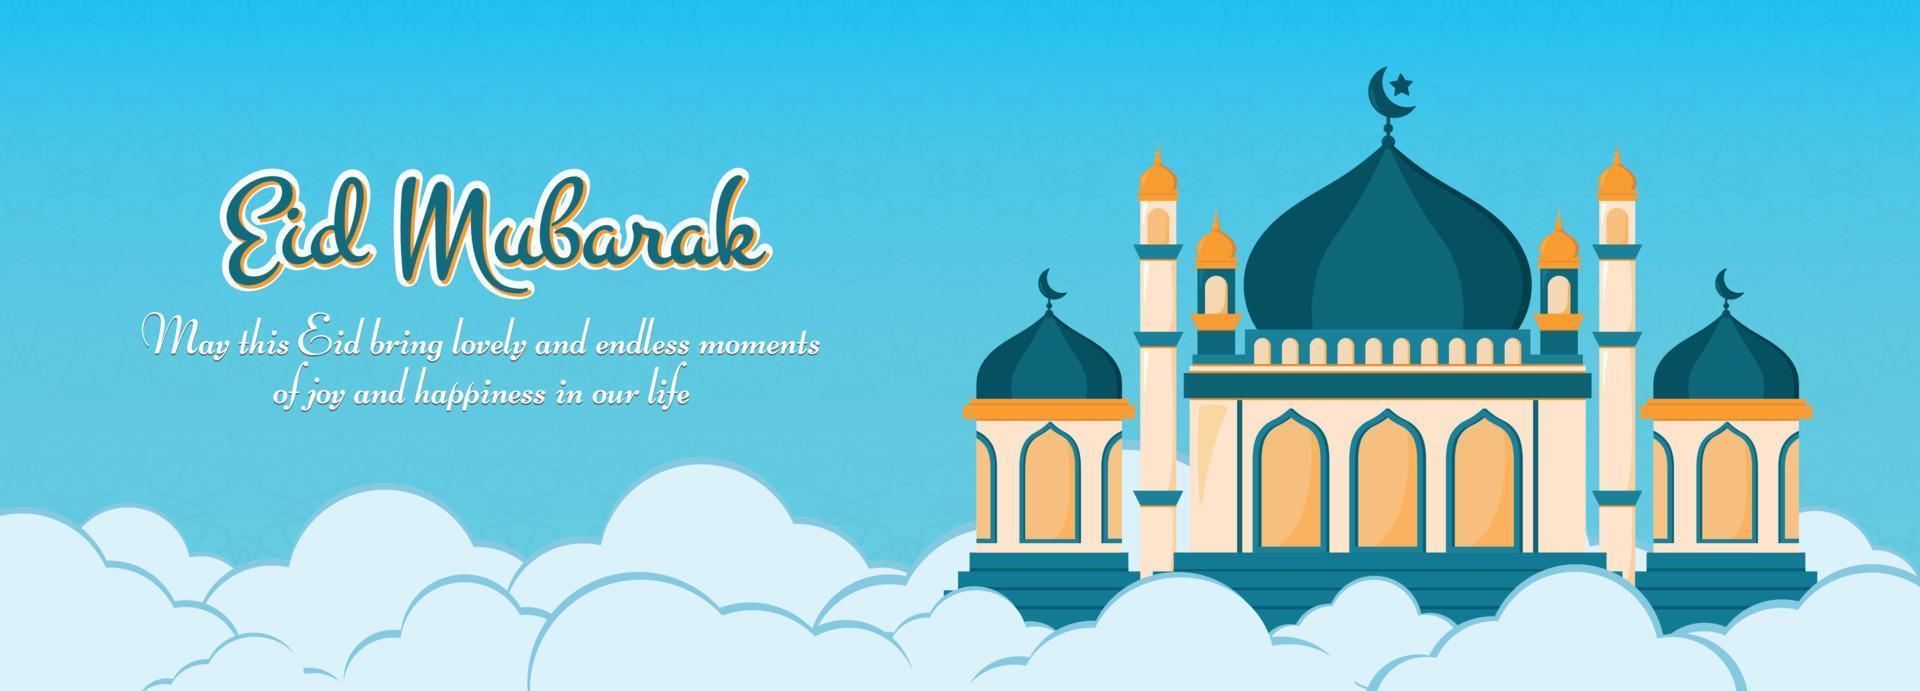 Flat decorative eid mubarak islamic banner background with mosque and islamic pattern vector